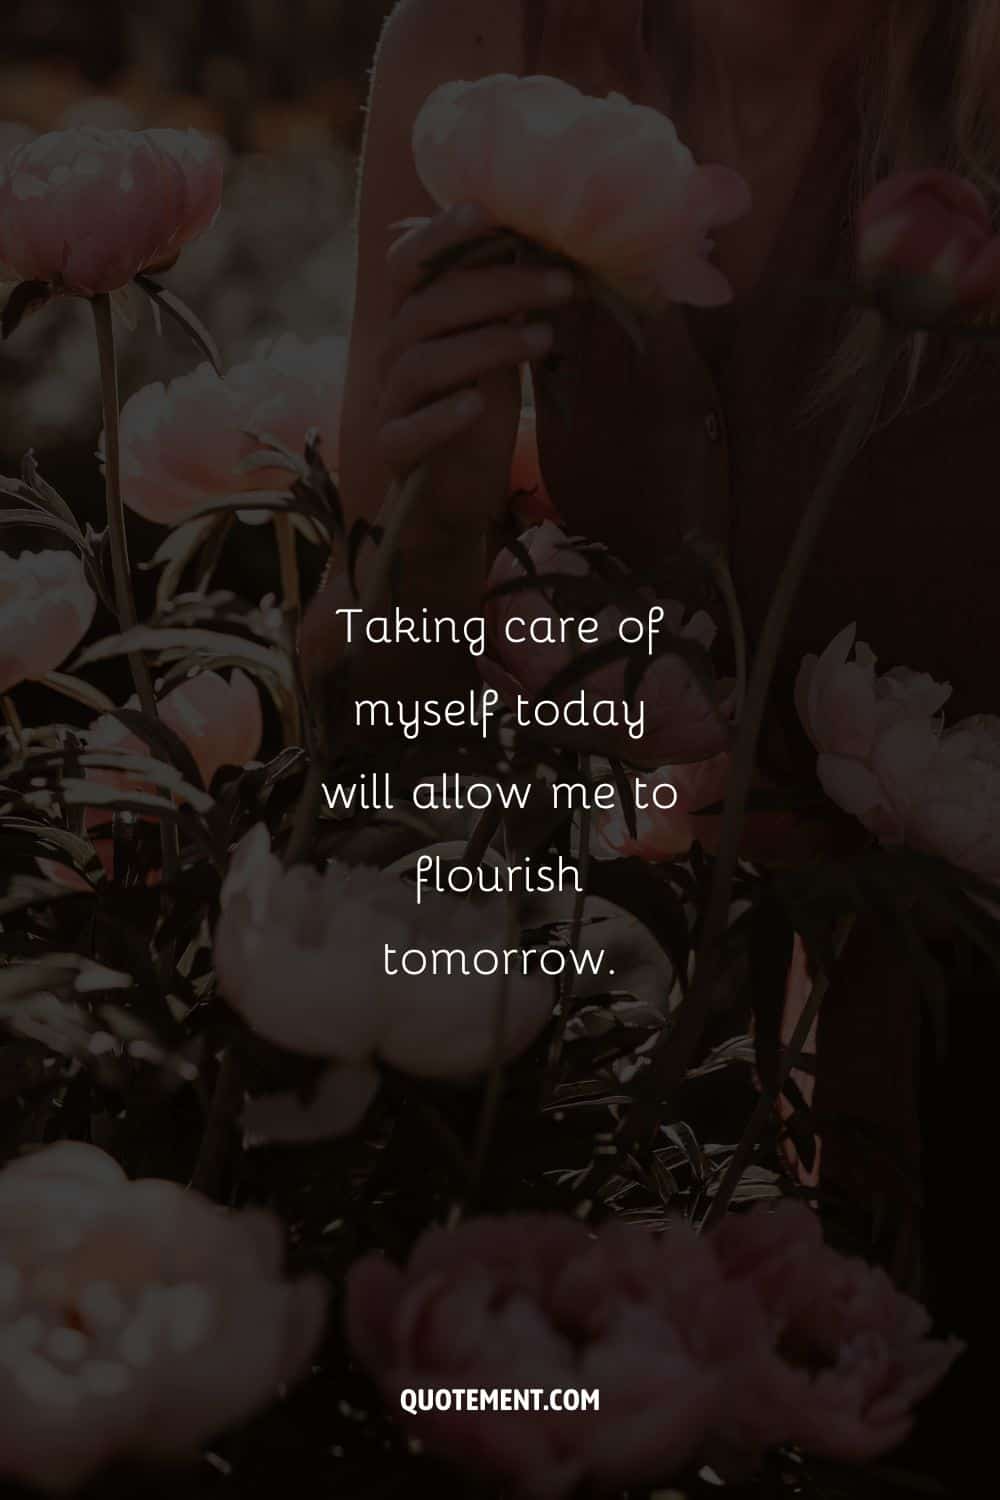 A woman surrounded by flowers image representing a self-care affirmation